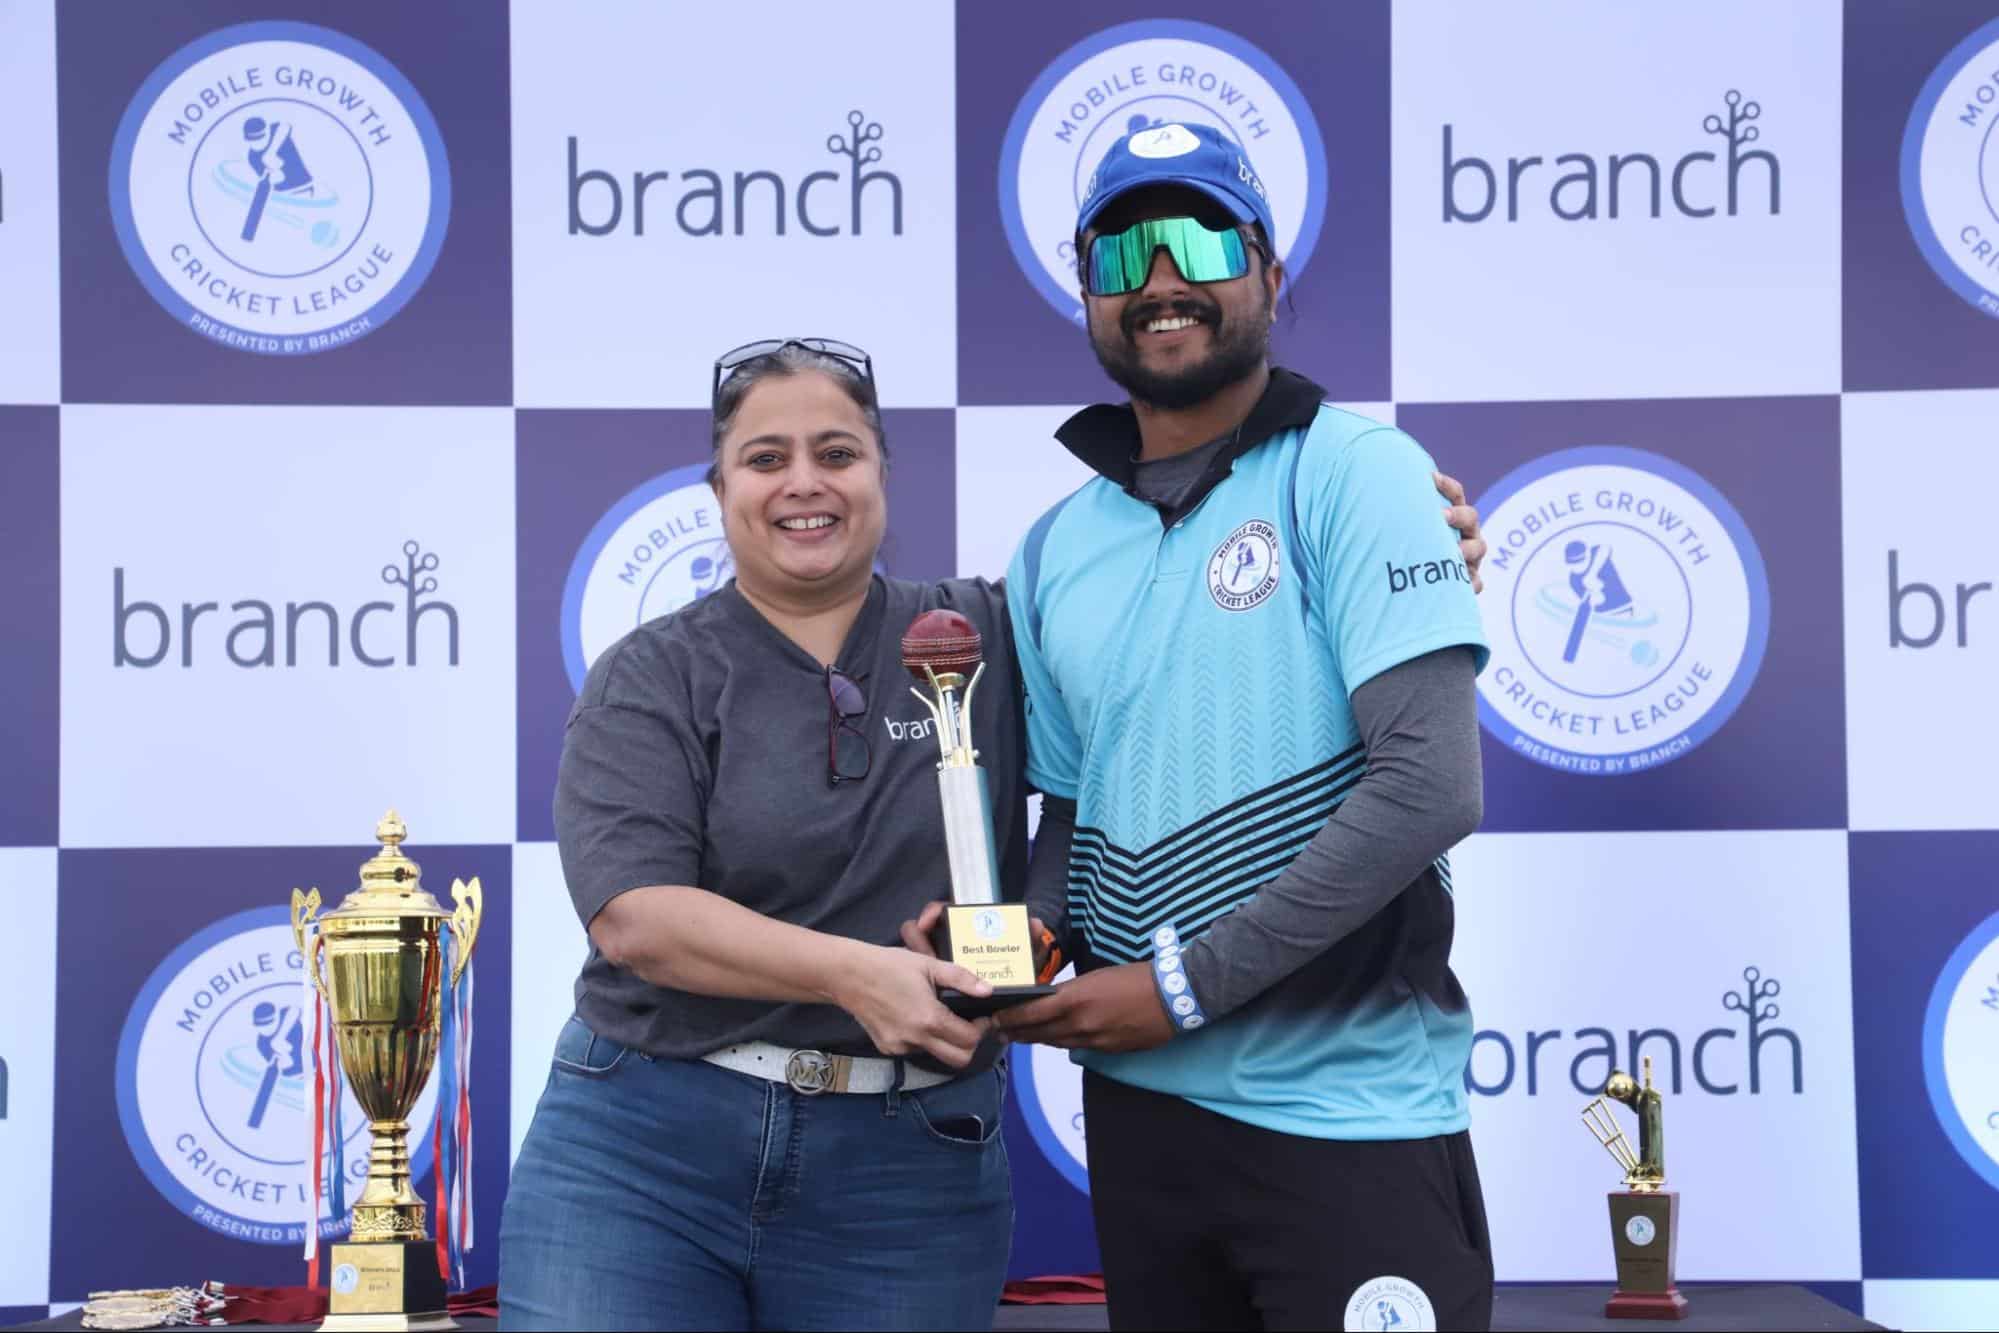 Branch's Yadush Bose displayed exceptional bowling prowess, securing the Best Bowler award.